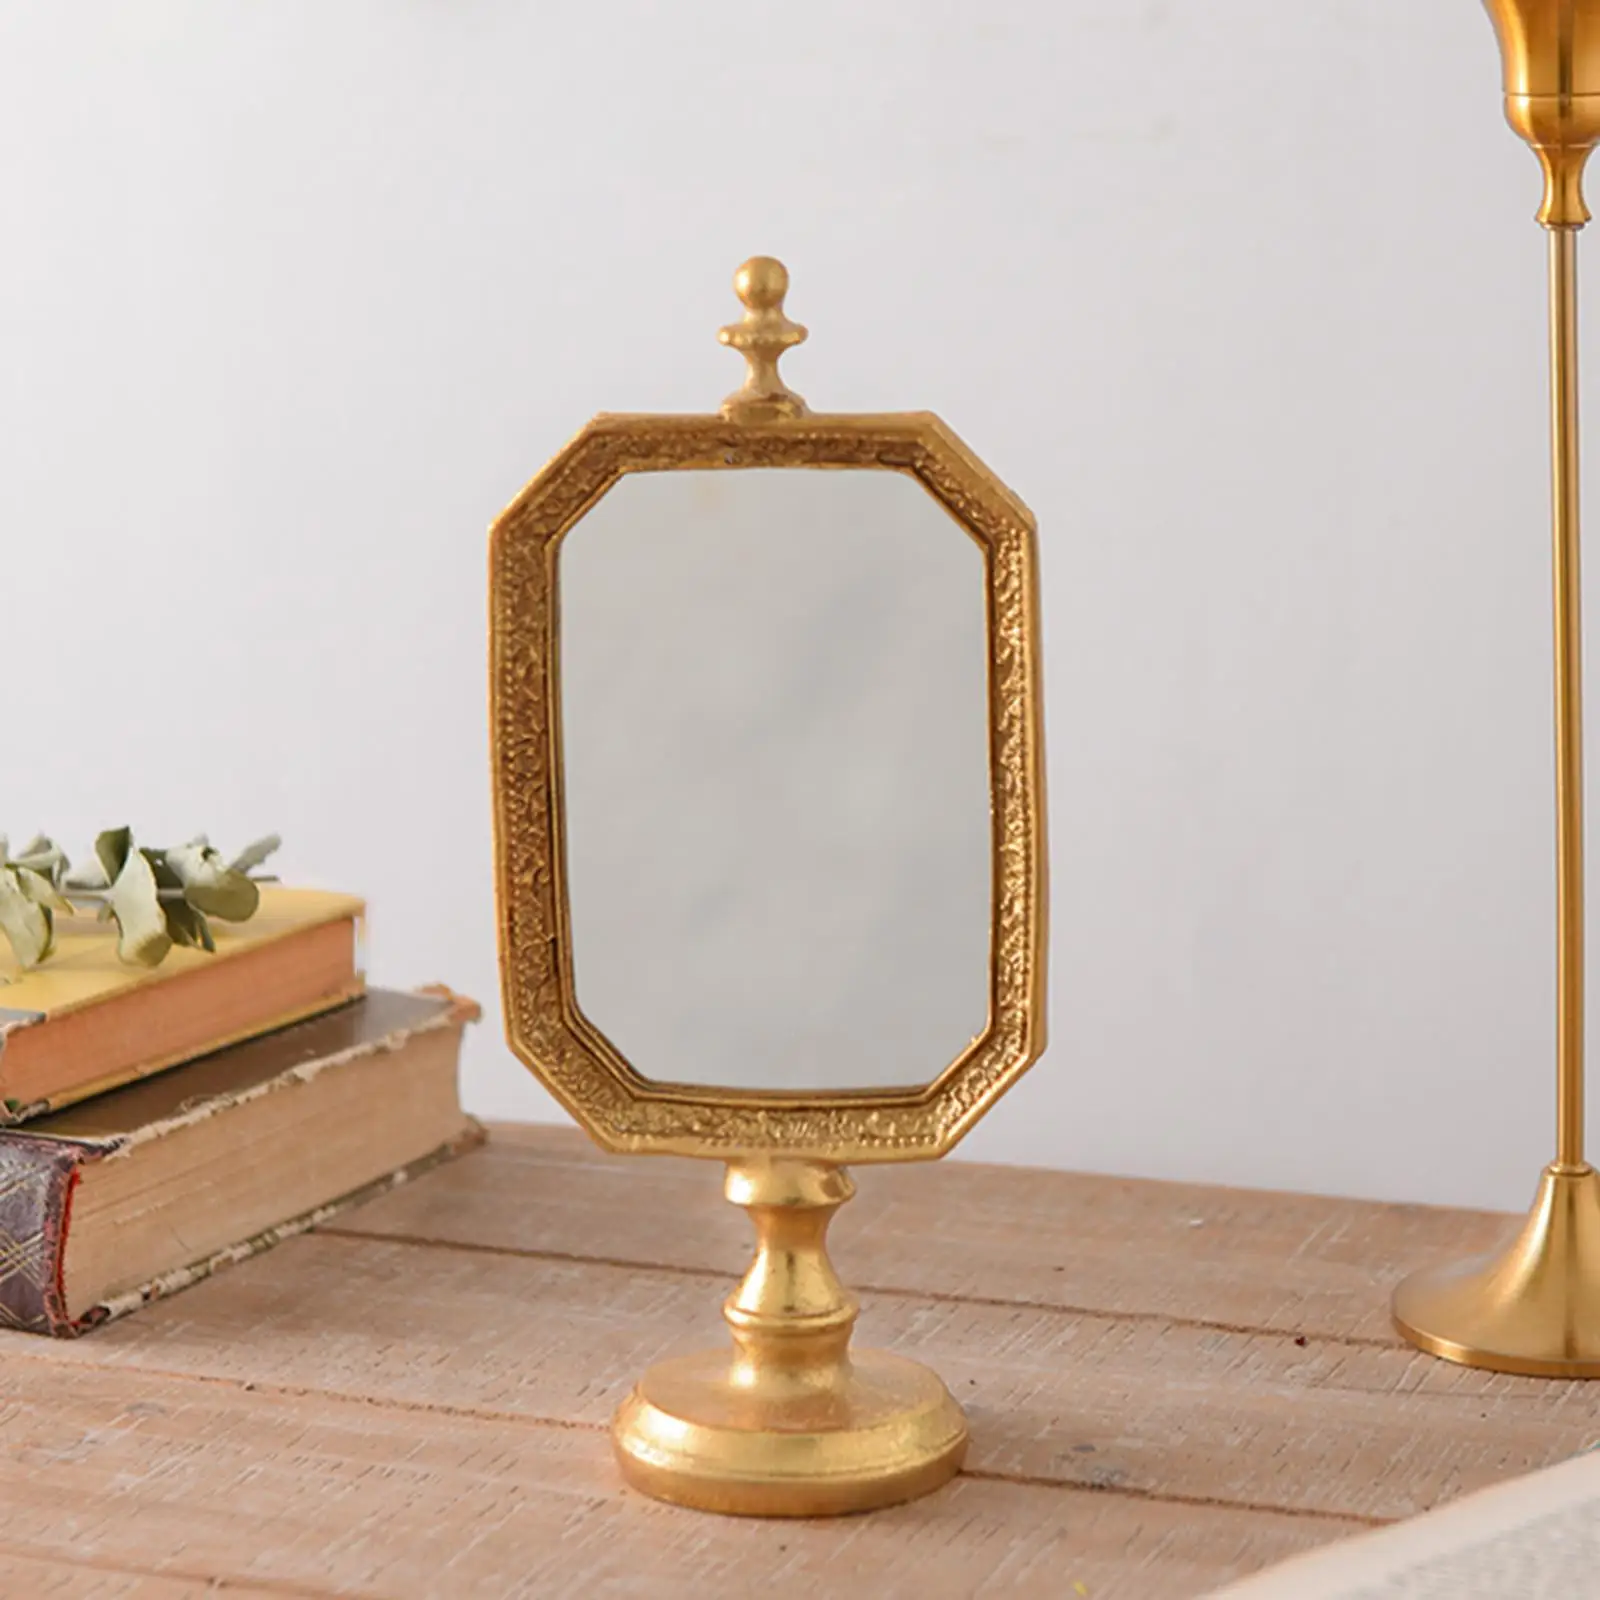 Vintage Style Makeup Mirror Tabletop Cosmtic Mirror Decorative  Retro  for Dresser Counter Display Birthday Gift